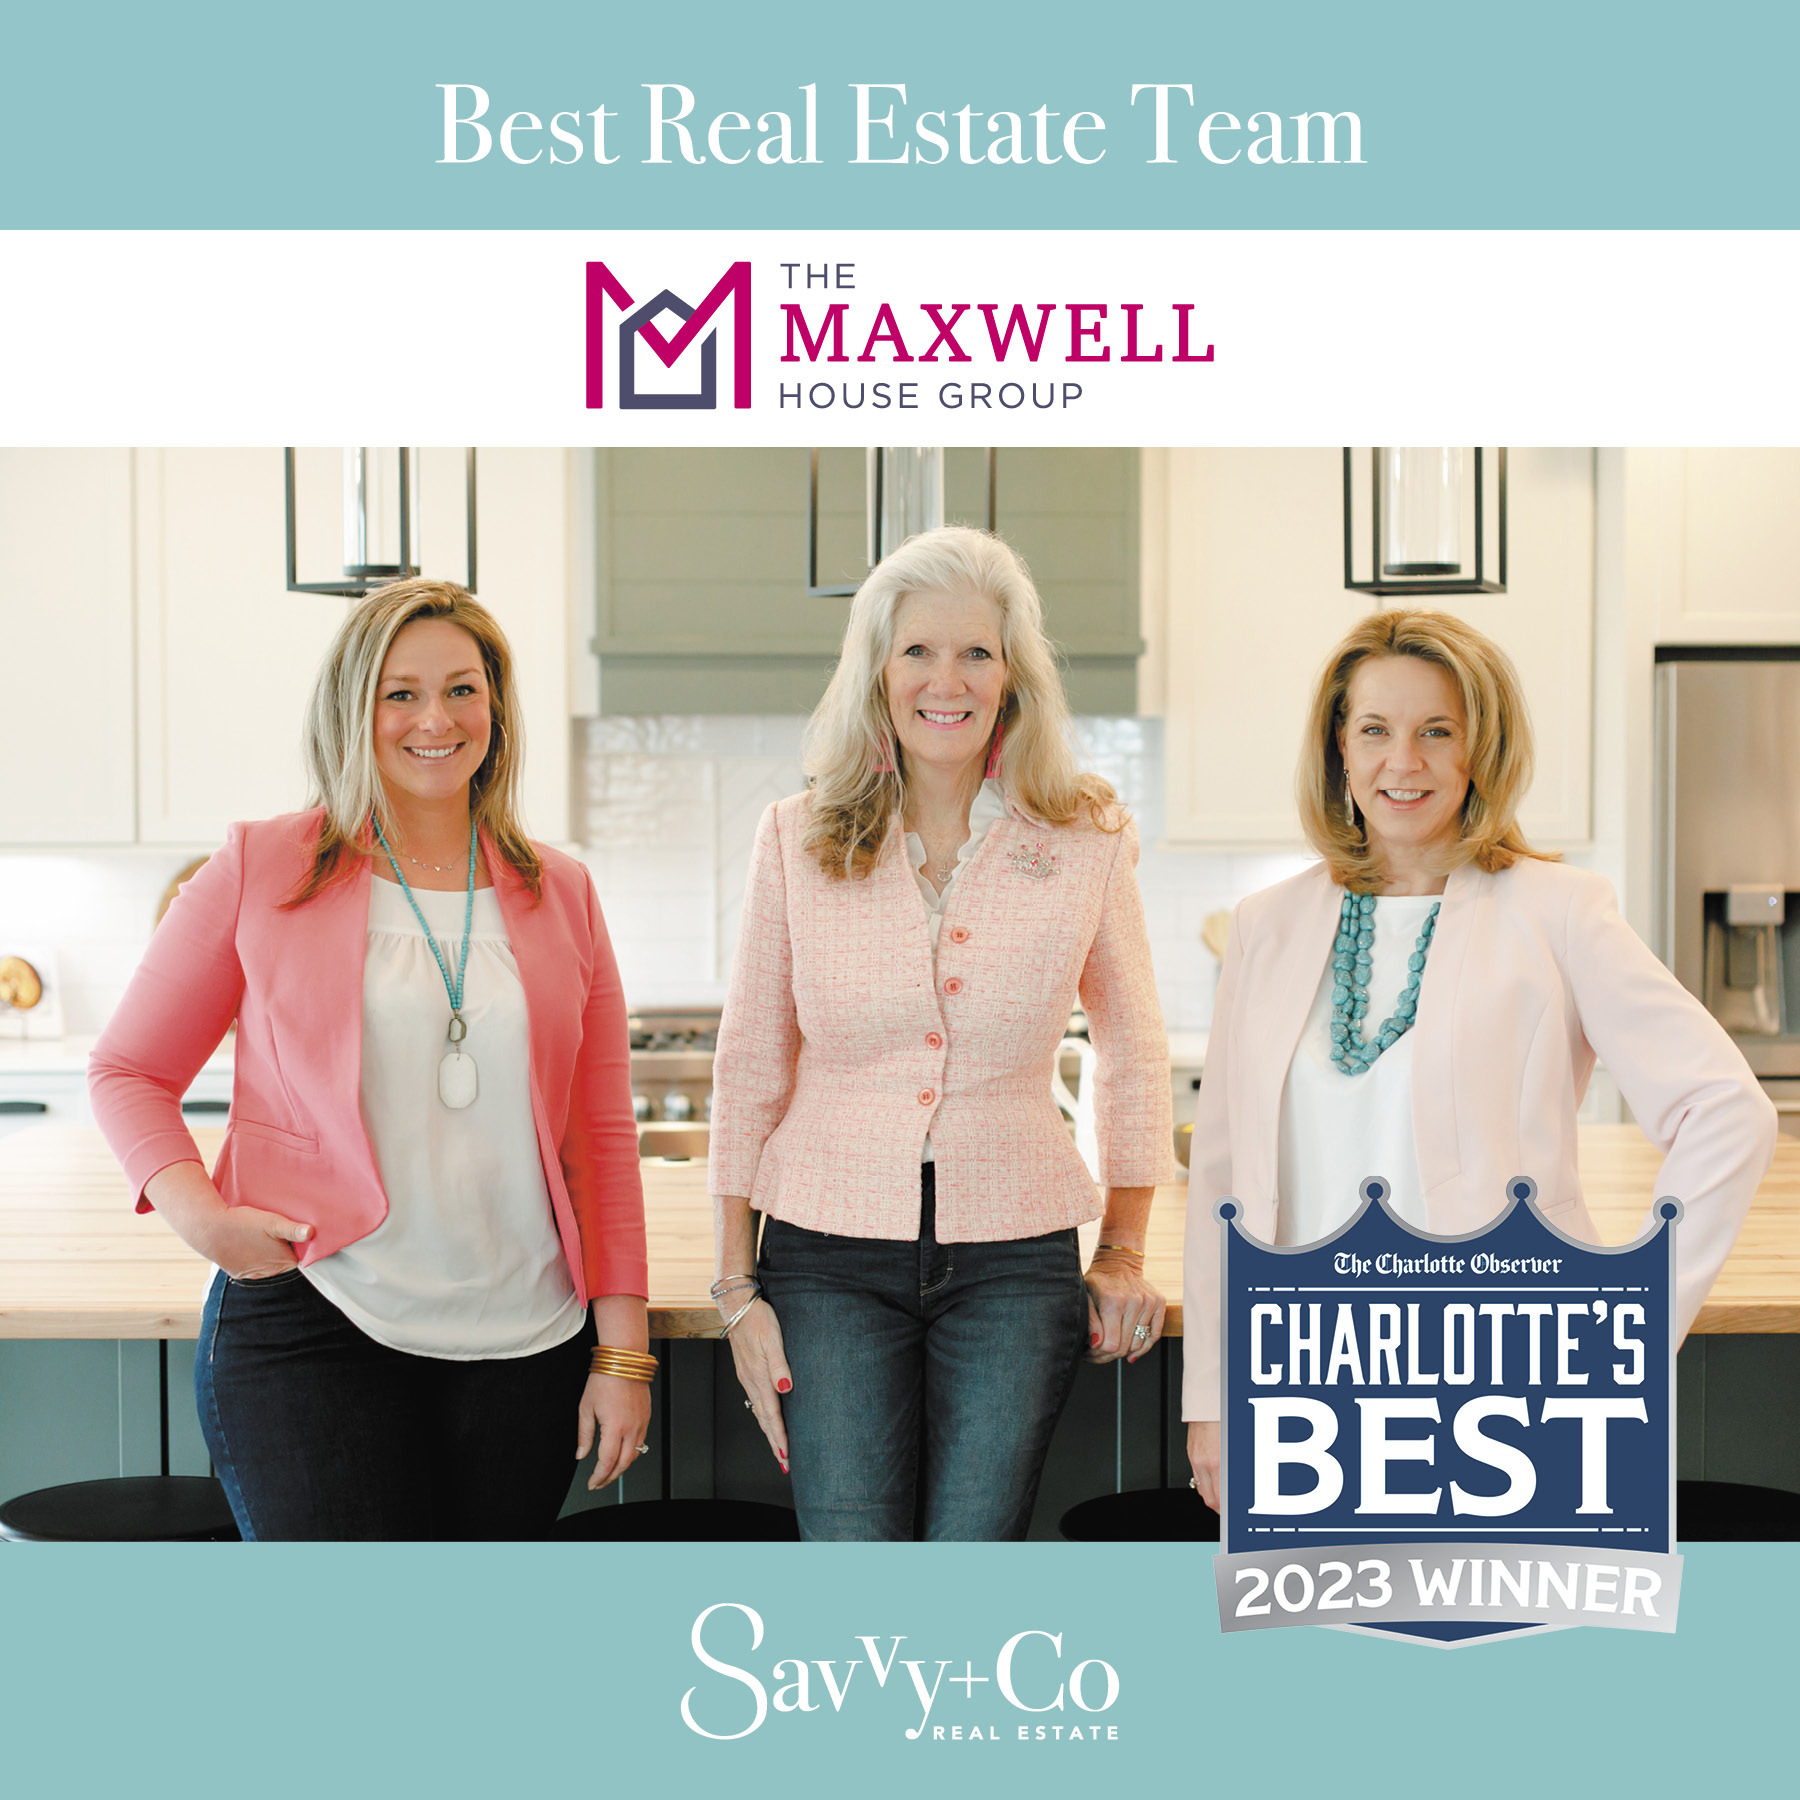 The Maxwell House Group - Charlotte's Best Real Estate Team